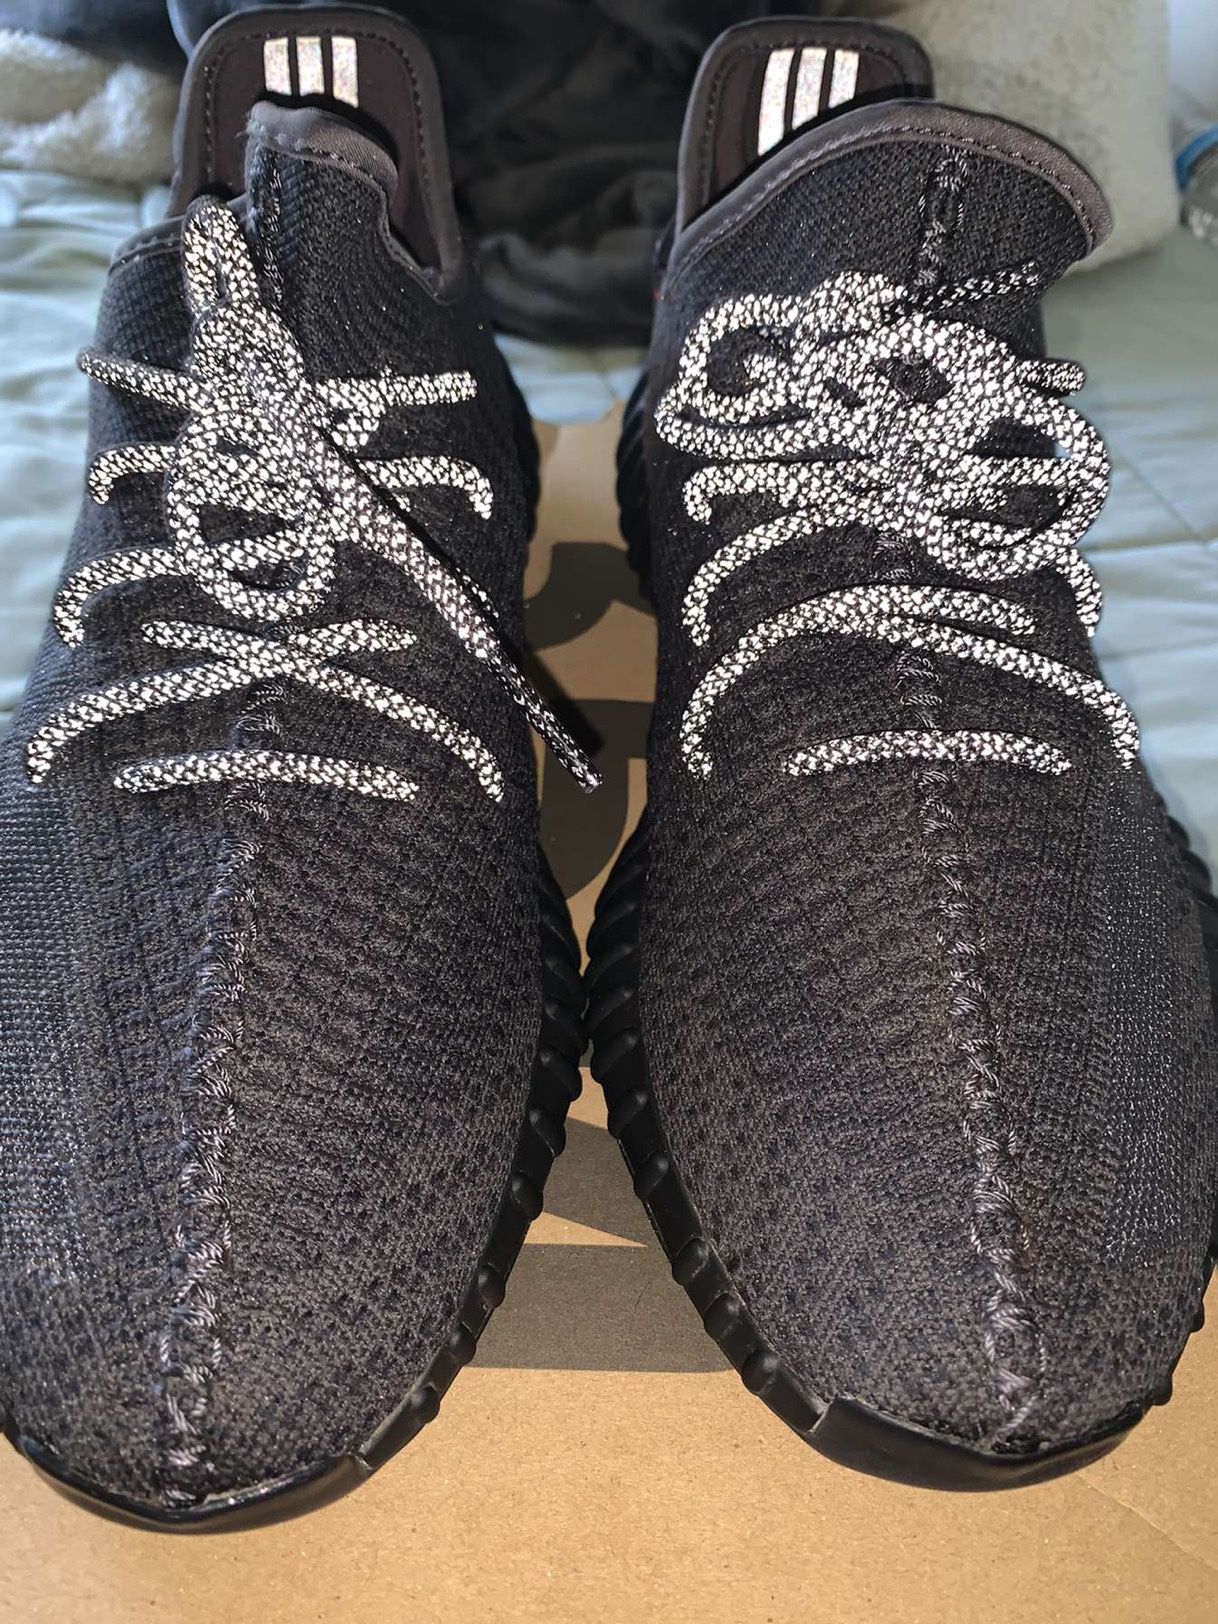 Yeezy's 350 boost v2 non reflective